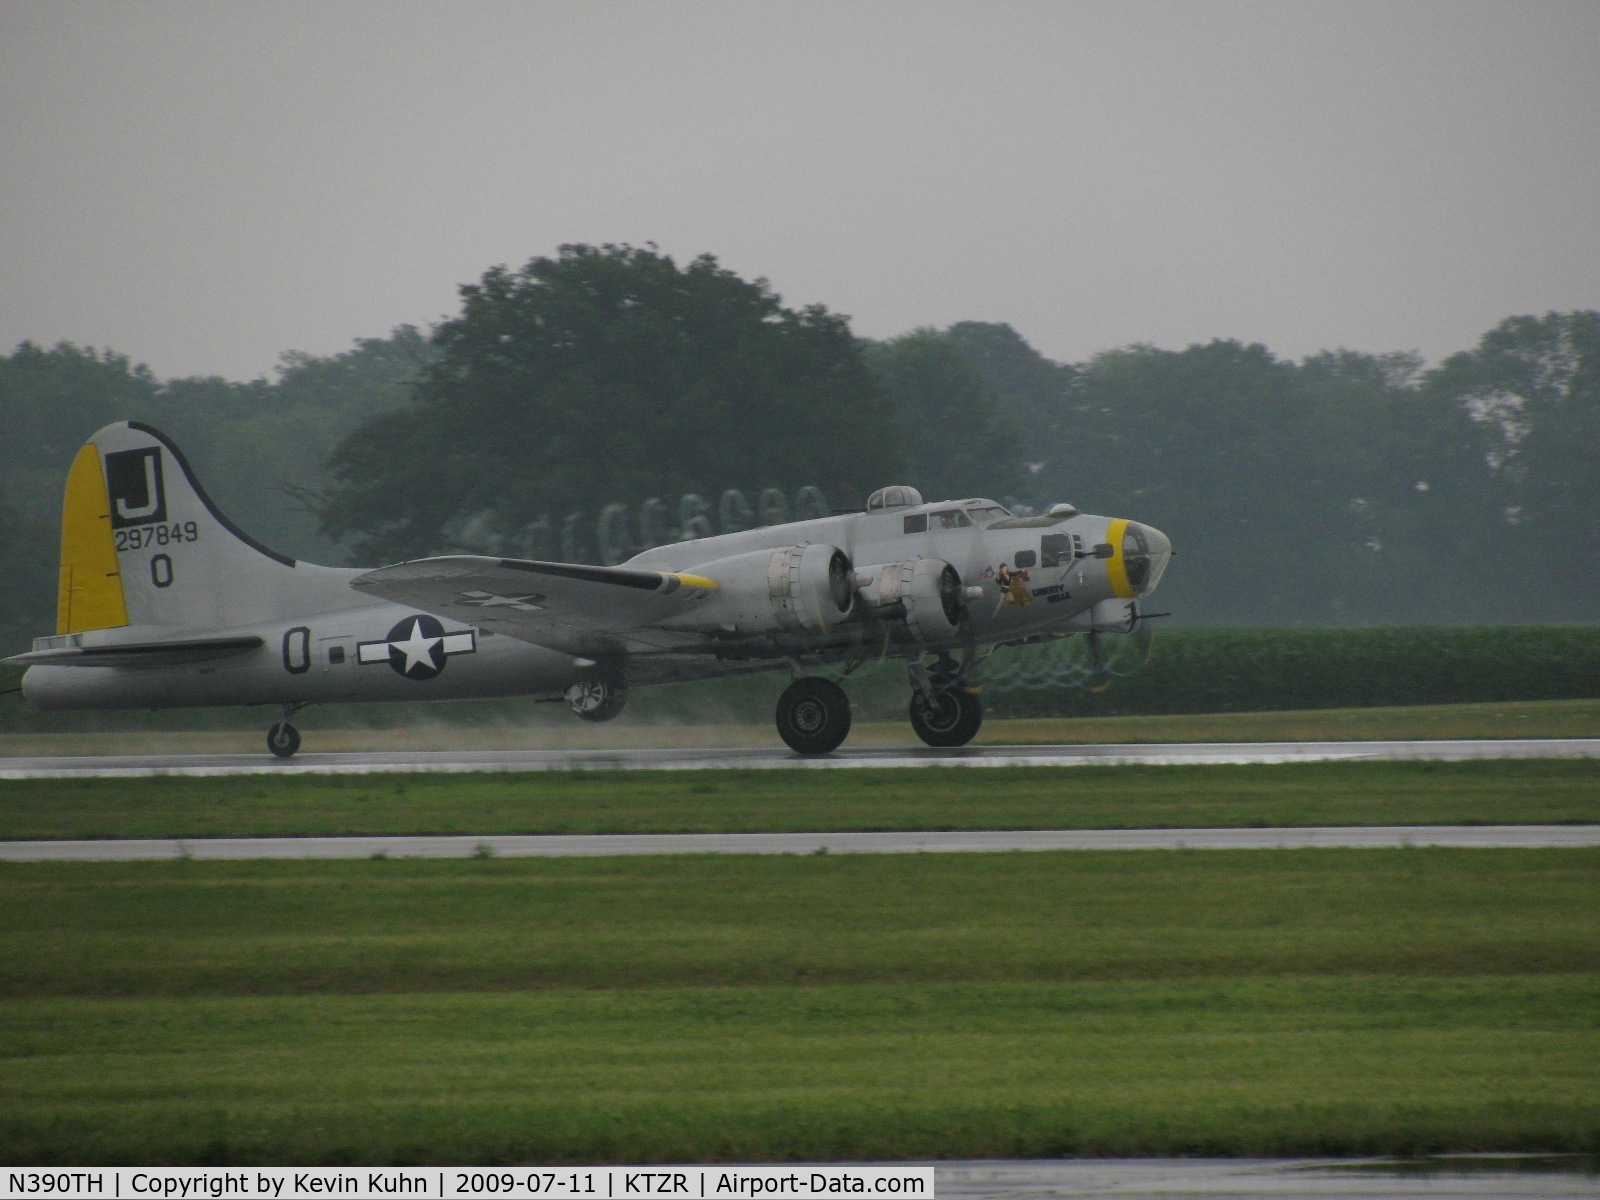 N390TH, 1944 Boeing B-17G Flying Fortress C/N Not found 44-85734, Takeoff on a rainy day